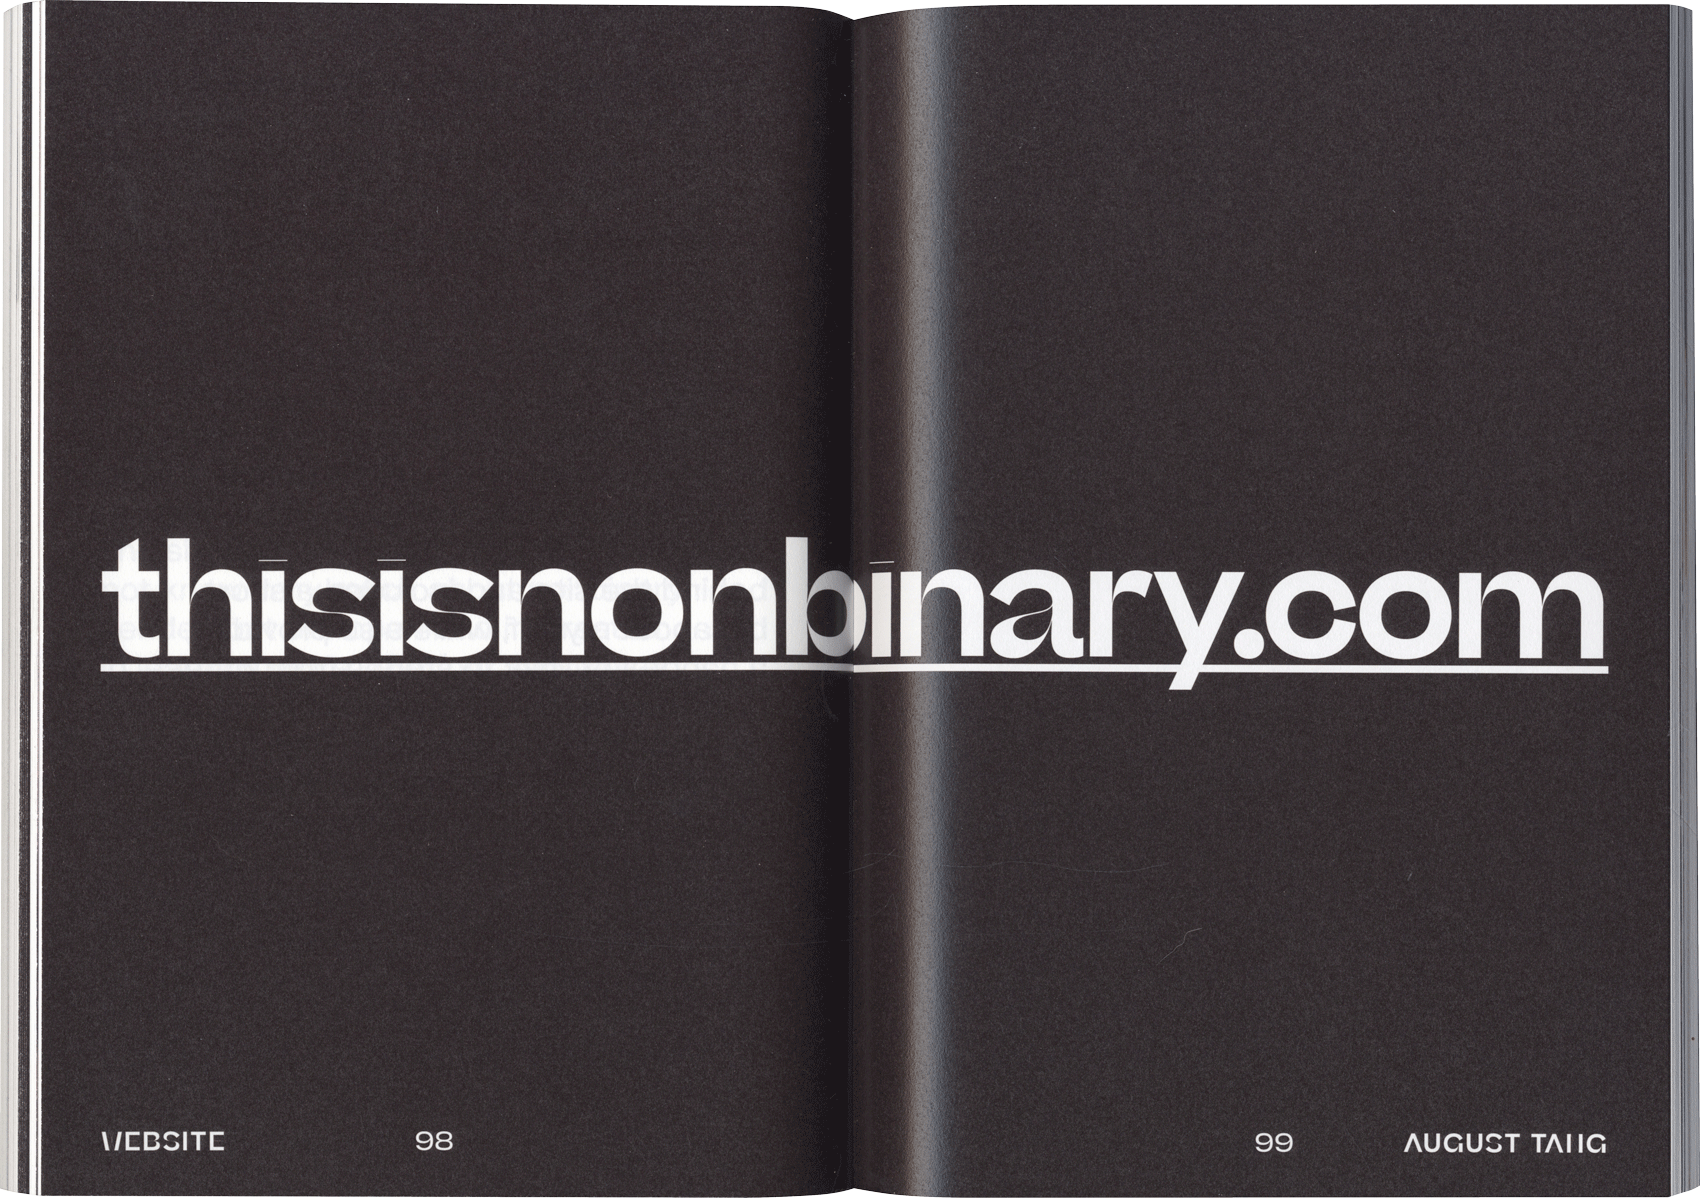 open spread of a book with the url "thisisnonbinary.com" typed across the page